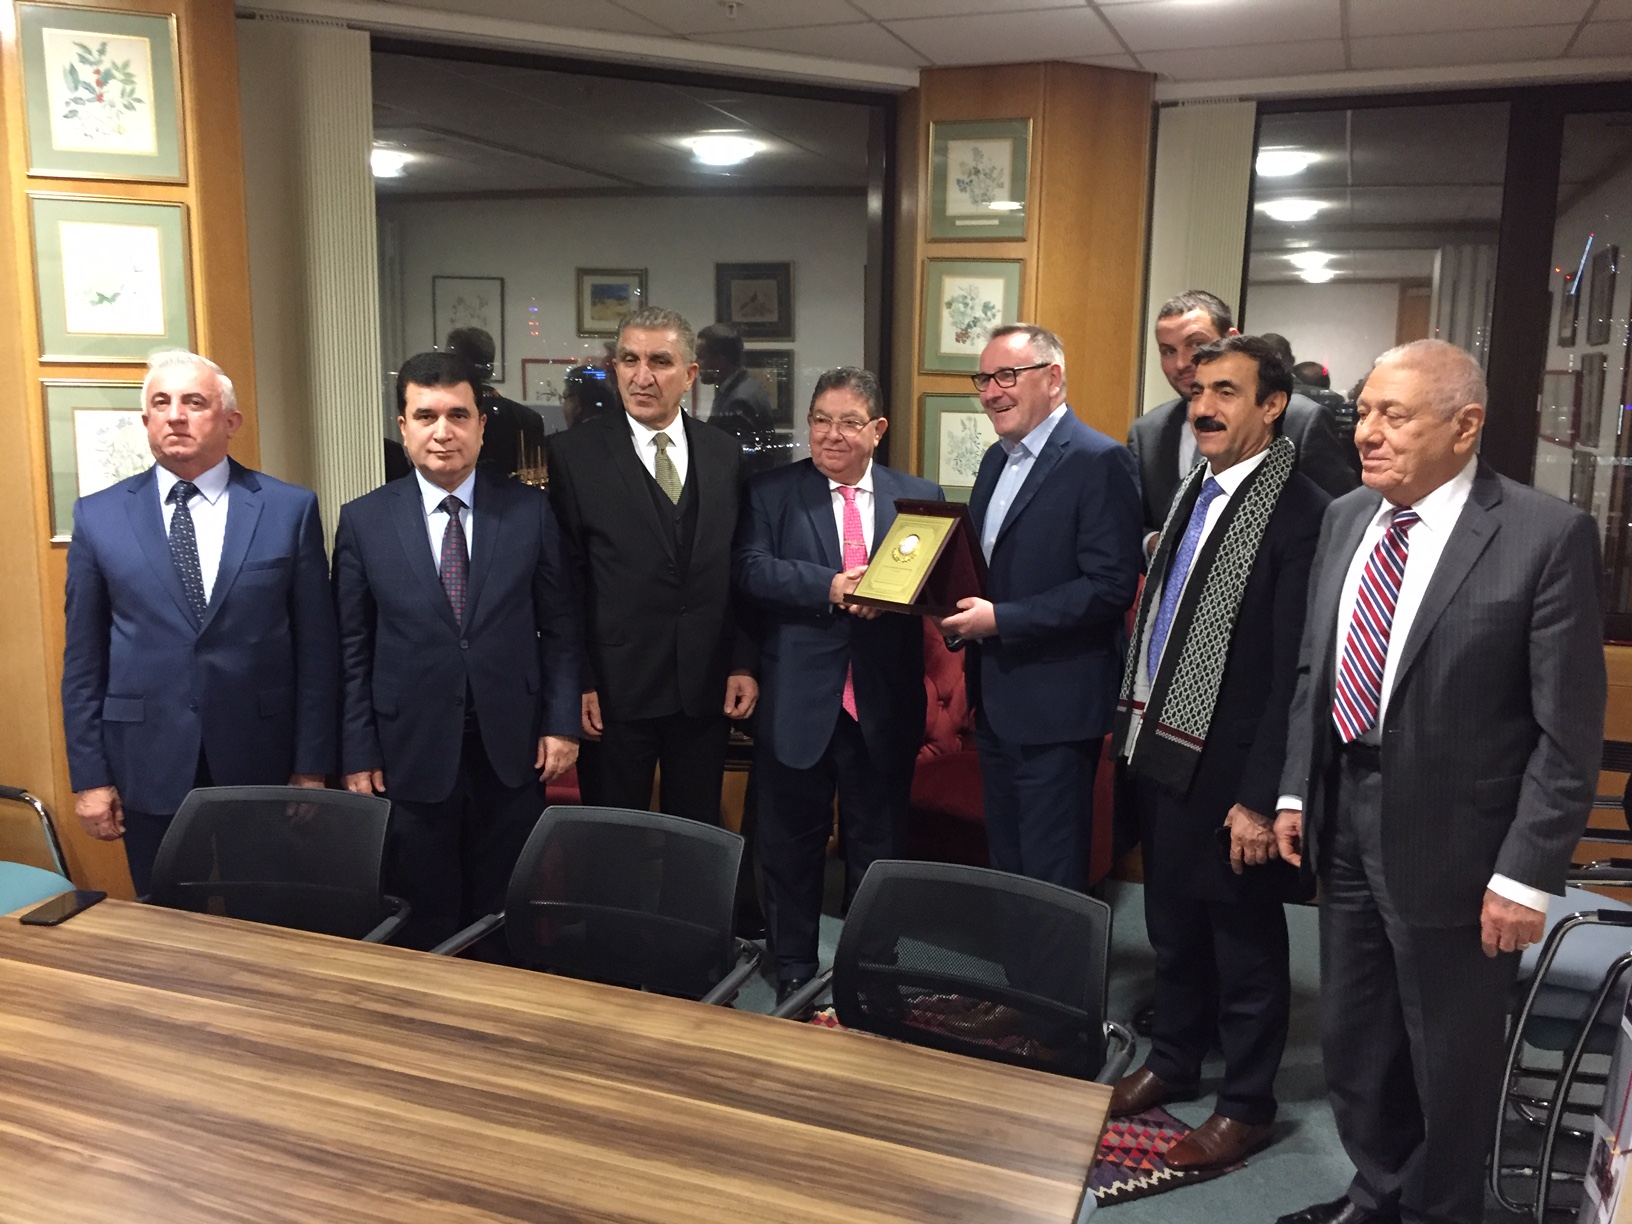 Meeting Between Liam Smyth of British Chambers of Commerce and representatives from KRG IMG_0866